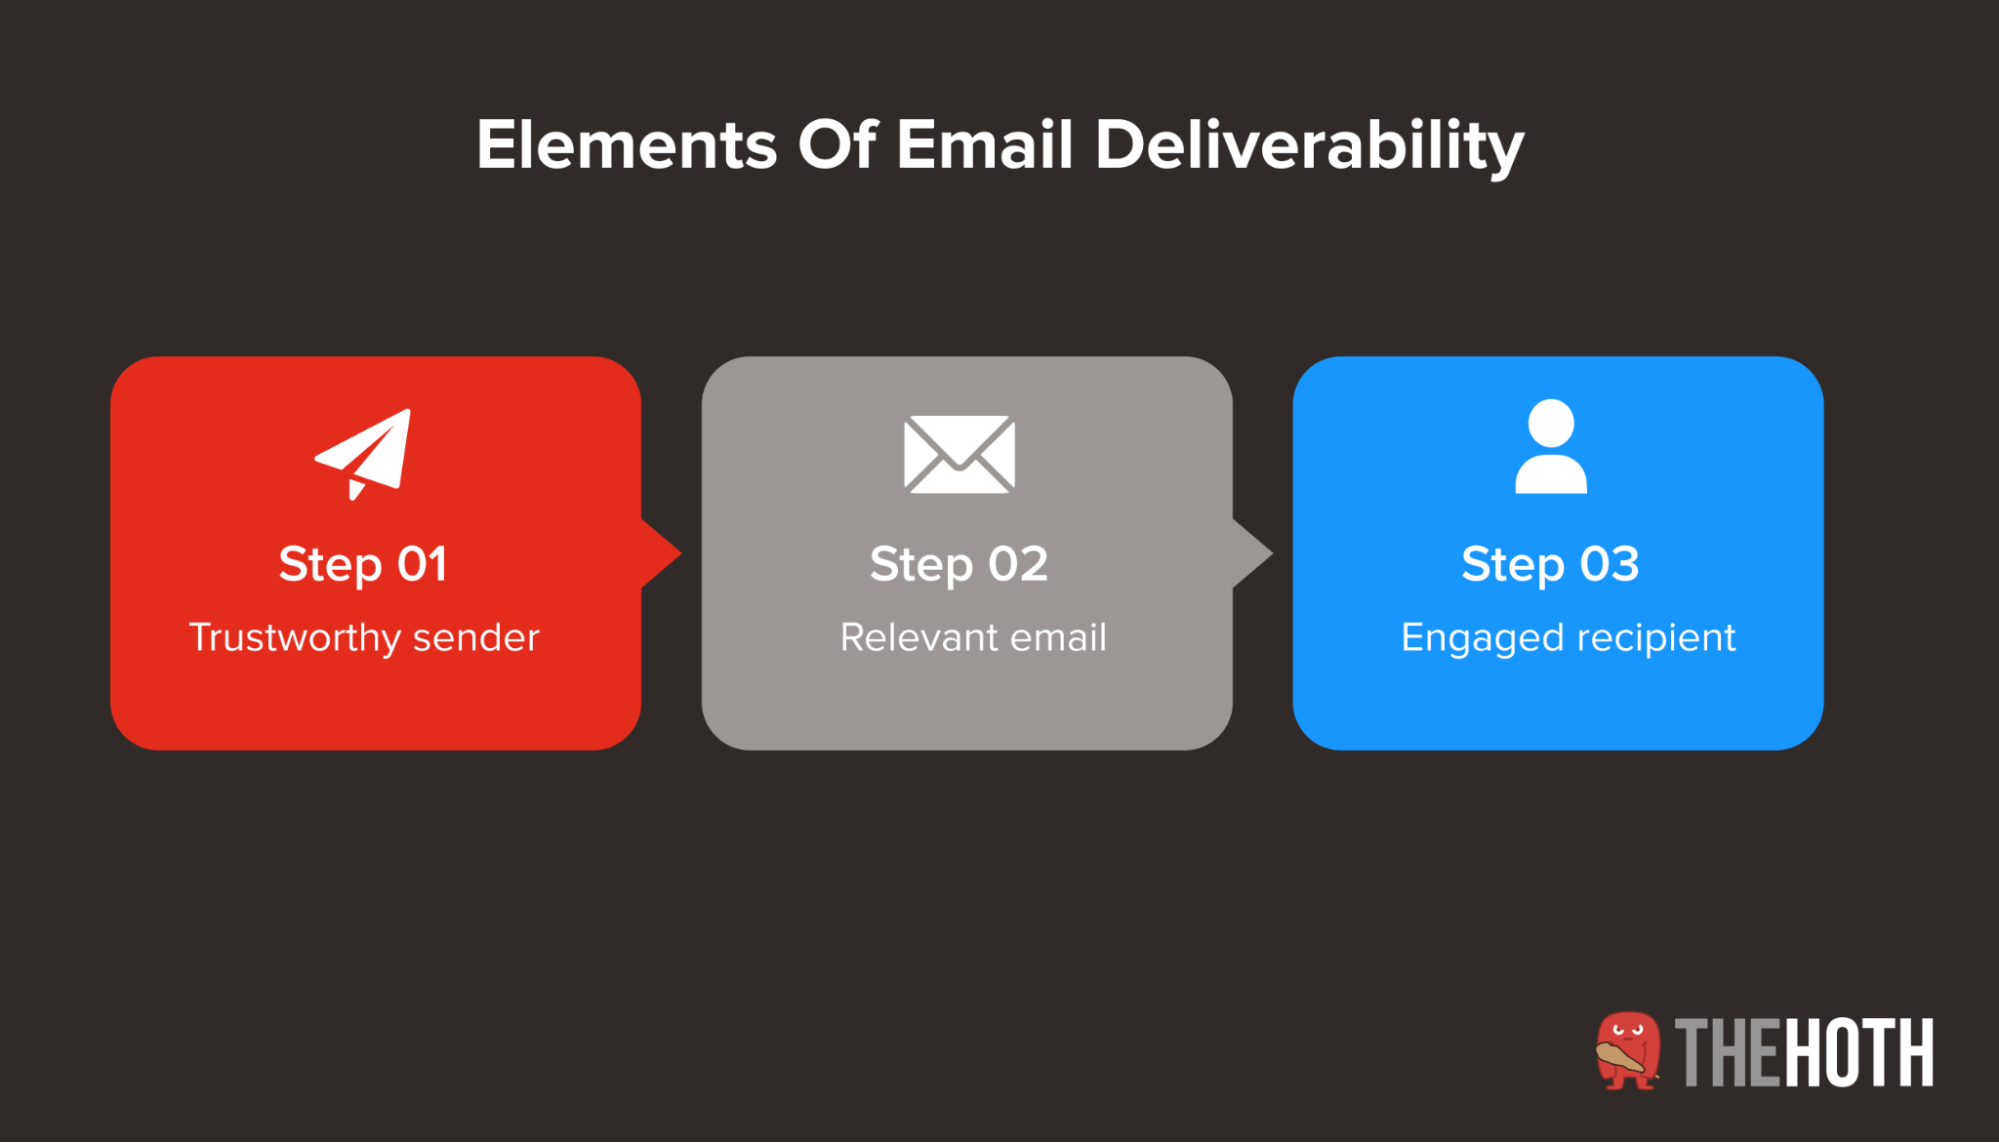 What influences email deliverability